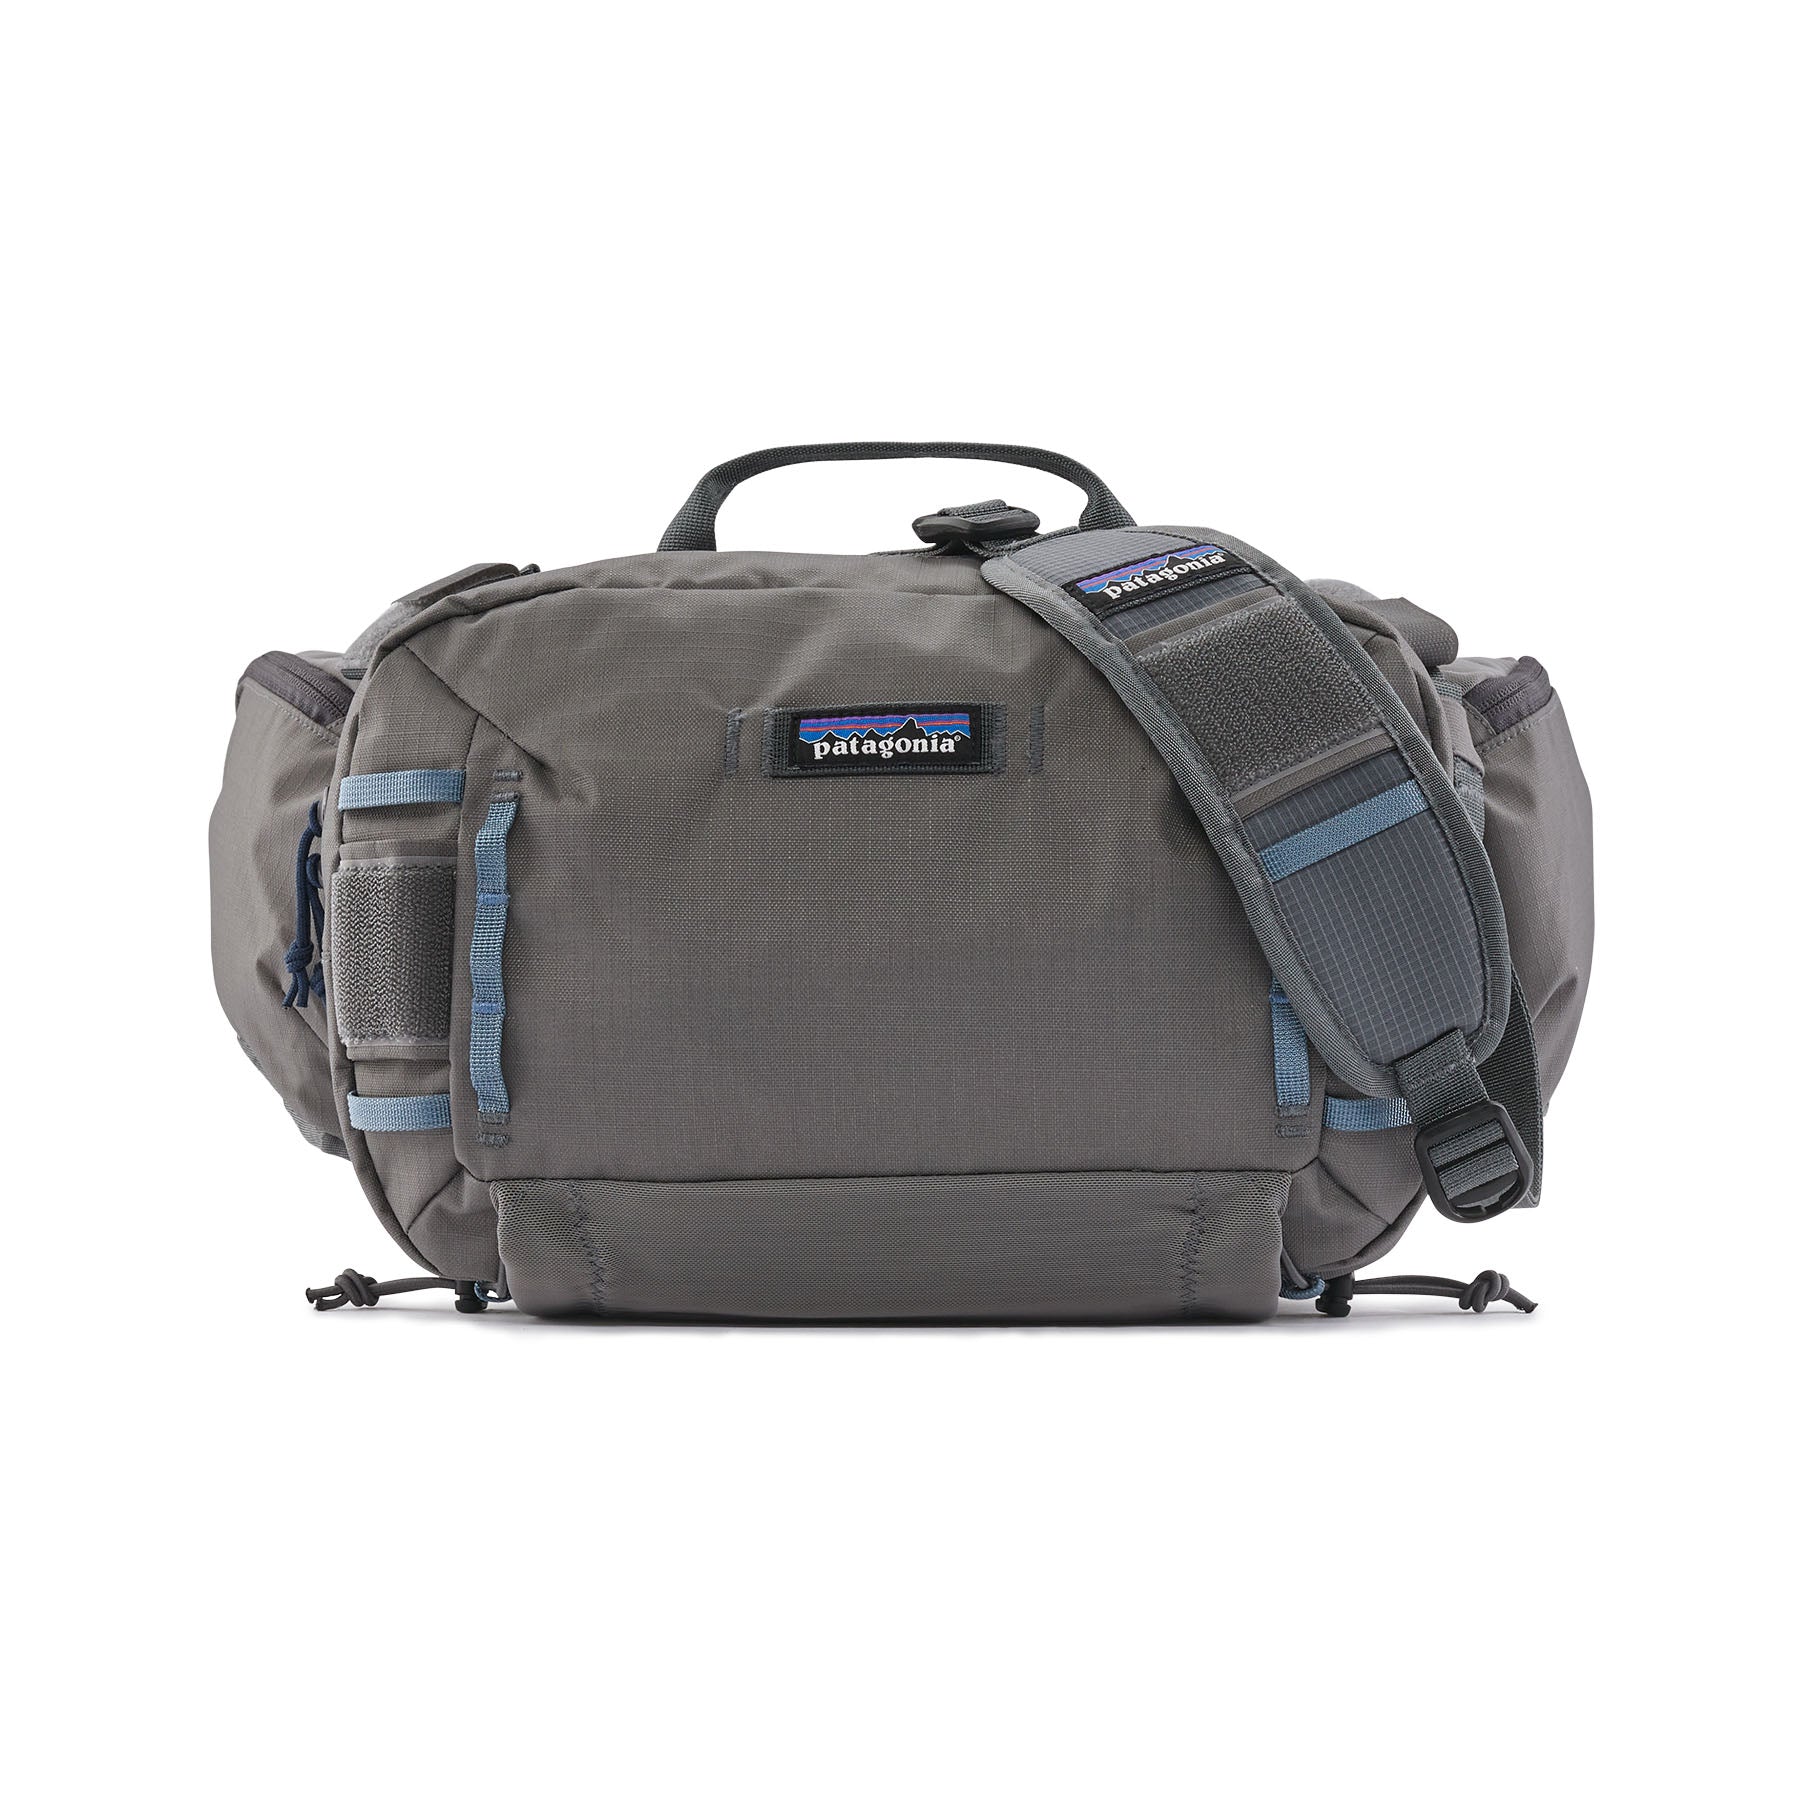 Simms Freestone Backpack - Iron Bow Fly Shop